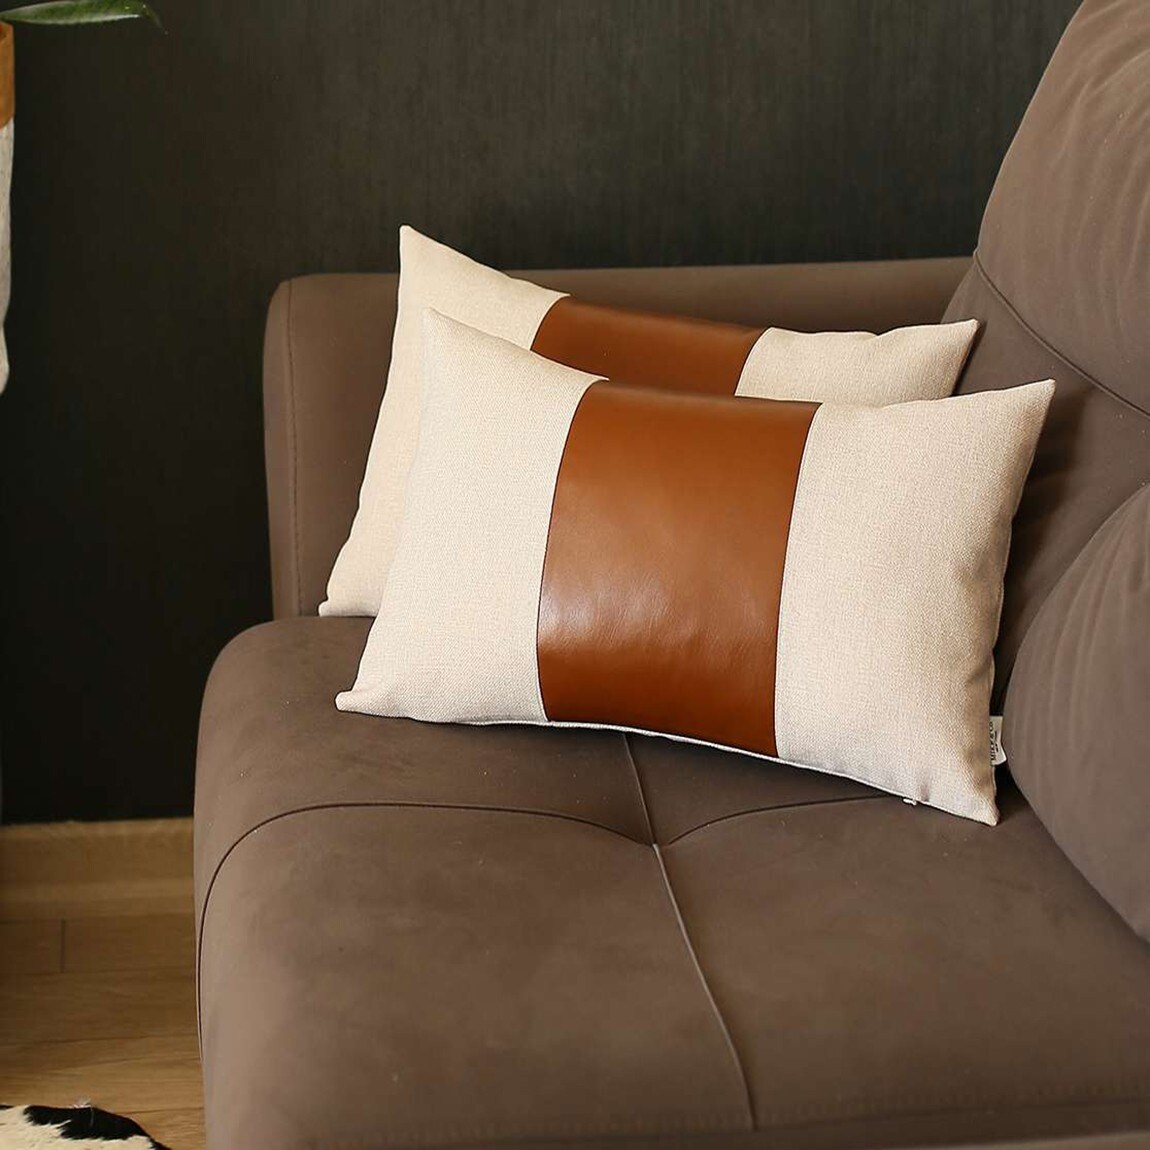 Set of 2 Faux Leather Lumbar Pillow Covers - Bed Bath & Beyond